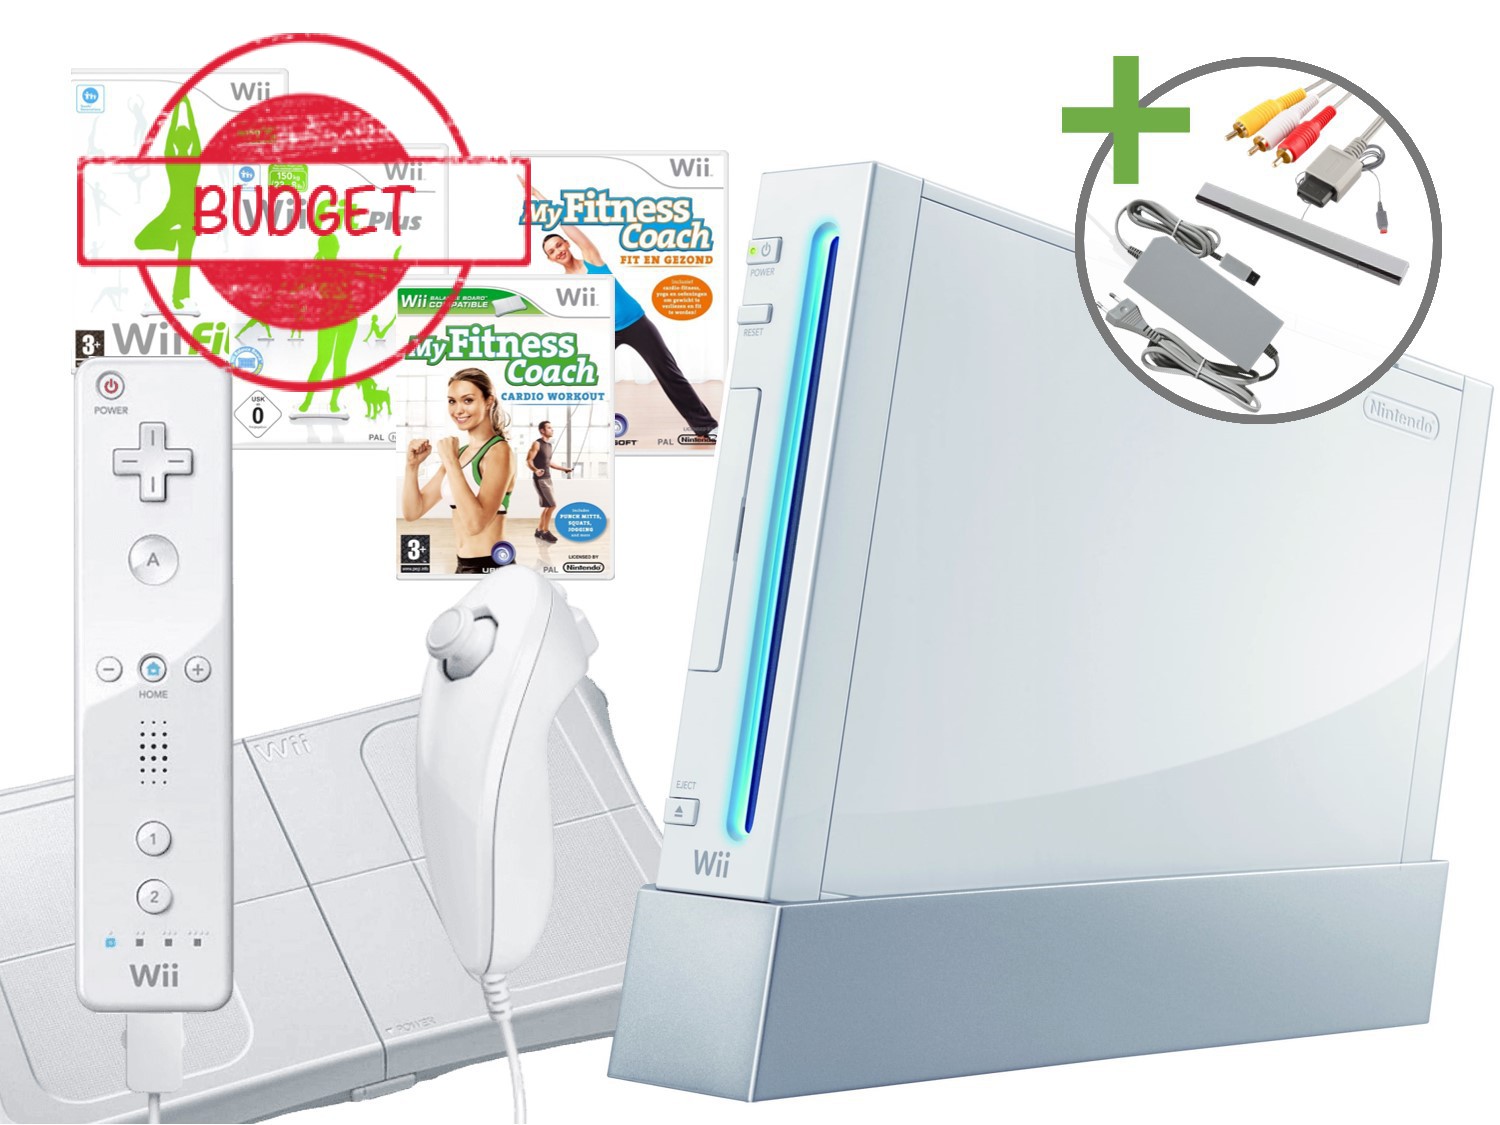 Nintendo Wii Starter Pack - The First of January Edition - Budget Kopen | Wii Hardware